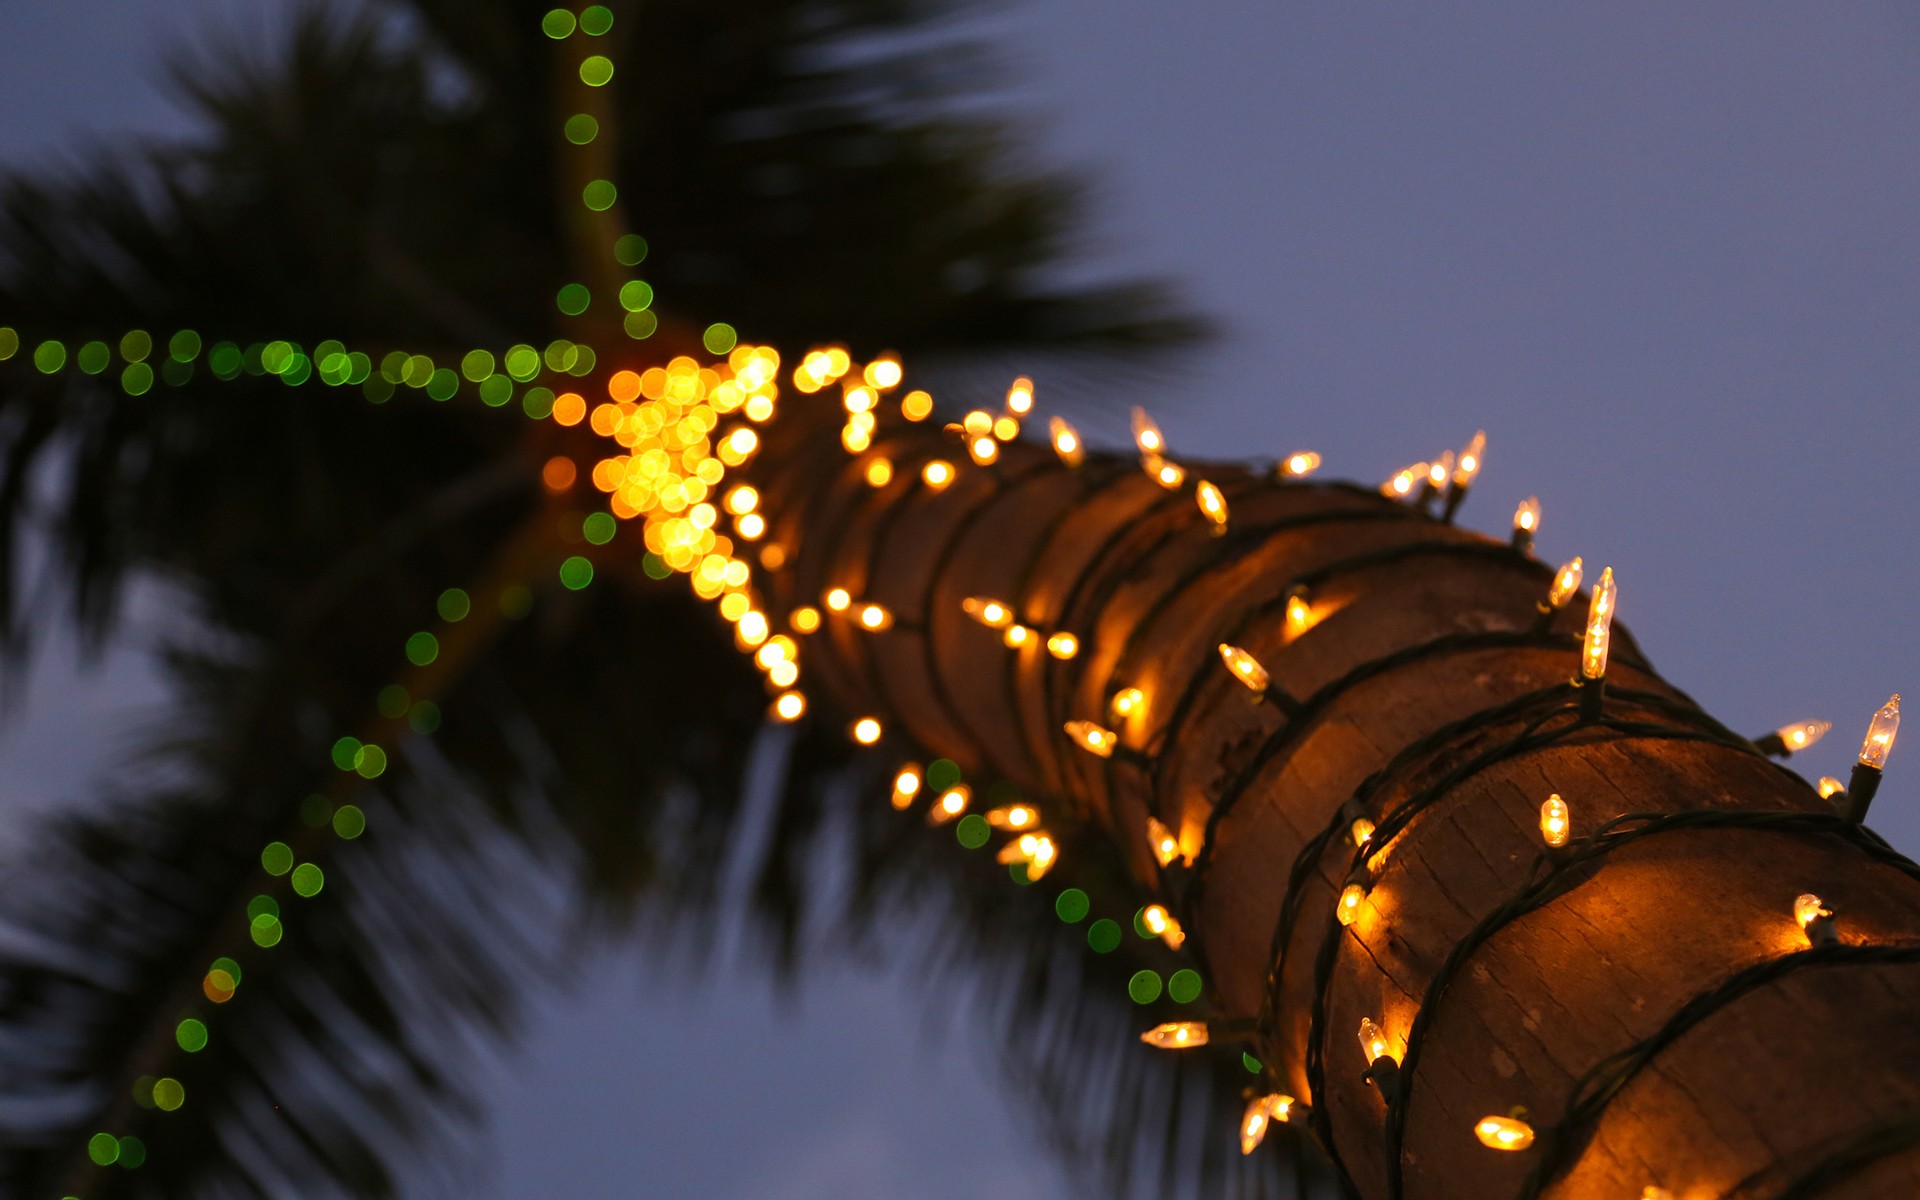 General 1920x1200 palm trees lights decorations bokeh blurred depth of field macro nature trees festivals worm's eye view Christmas lights bottom view